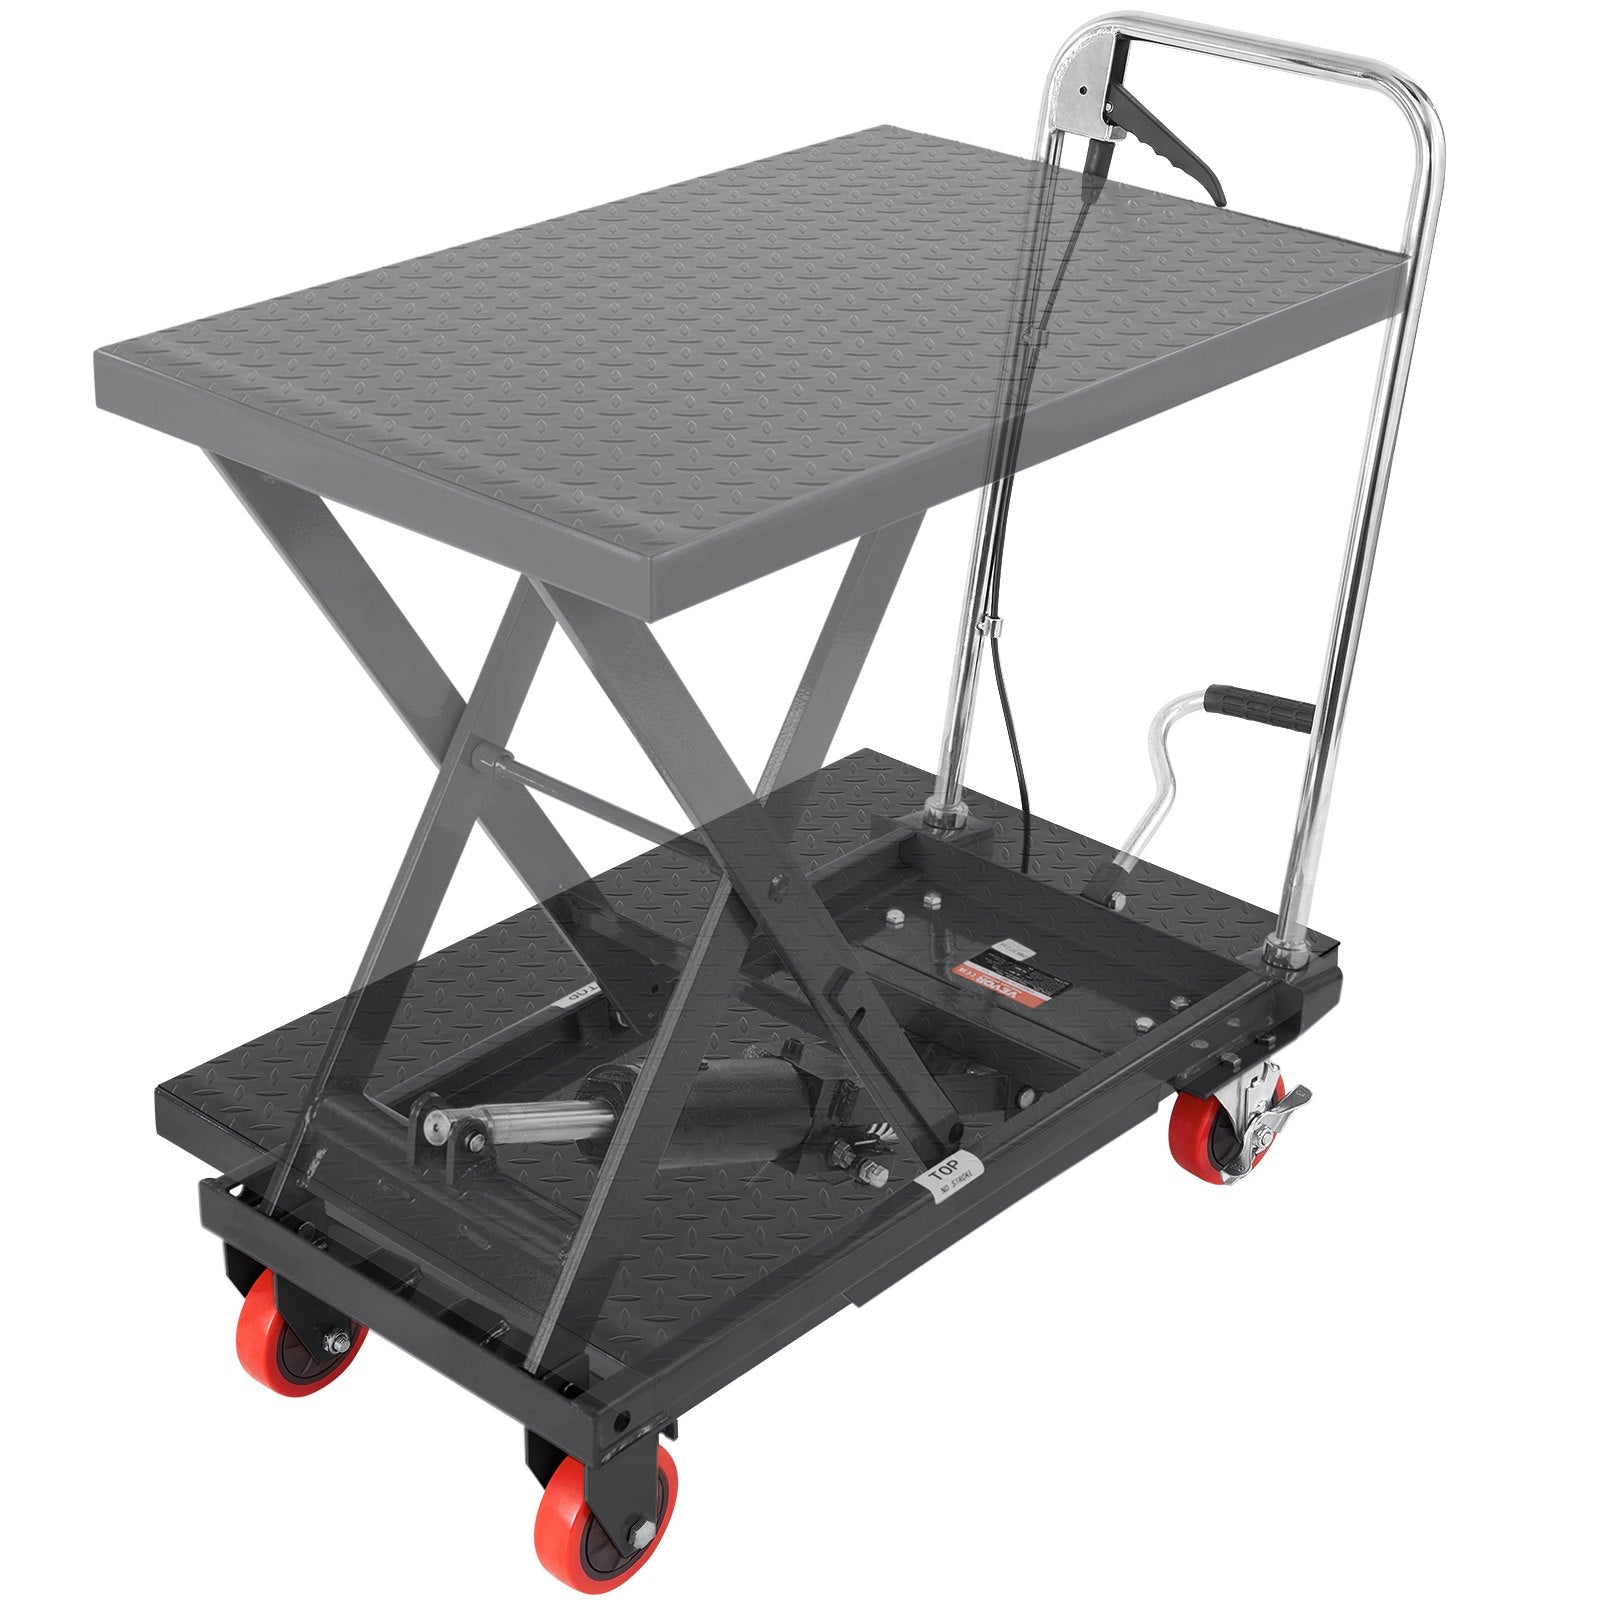 VEVOR Hydraulic Lift Table Cart, 500lbs Capacity 28.5" Lifting Height, Manual Single Scissor Lift Table with 4 Wheels and Non-slip Pad